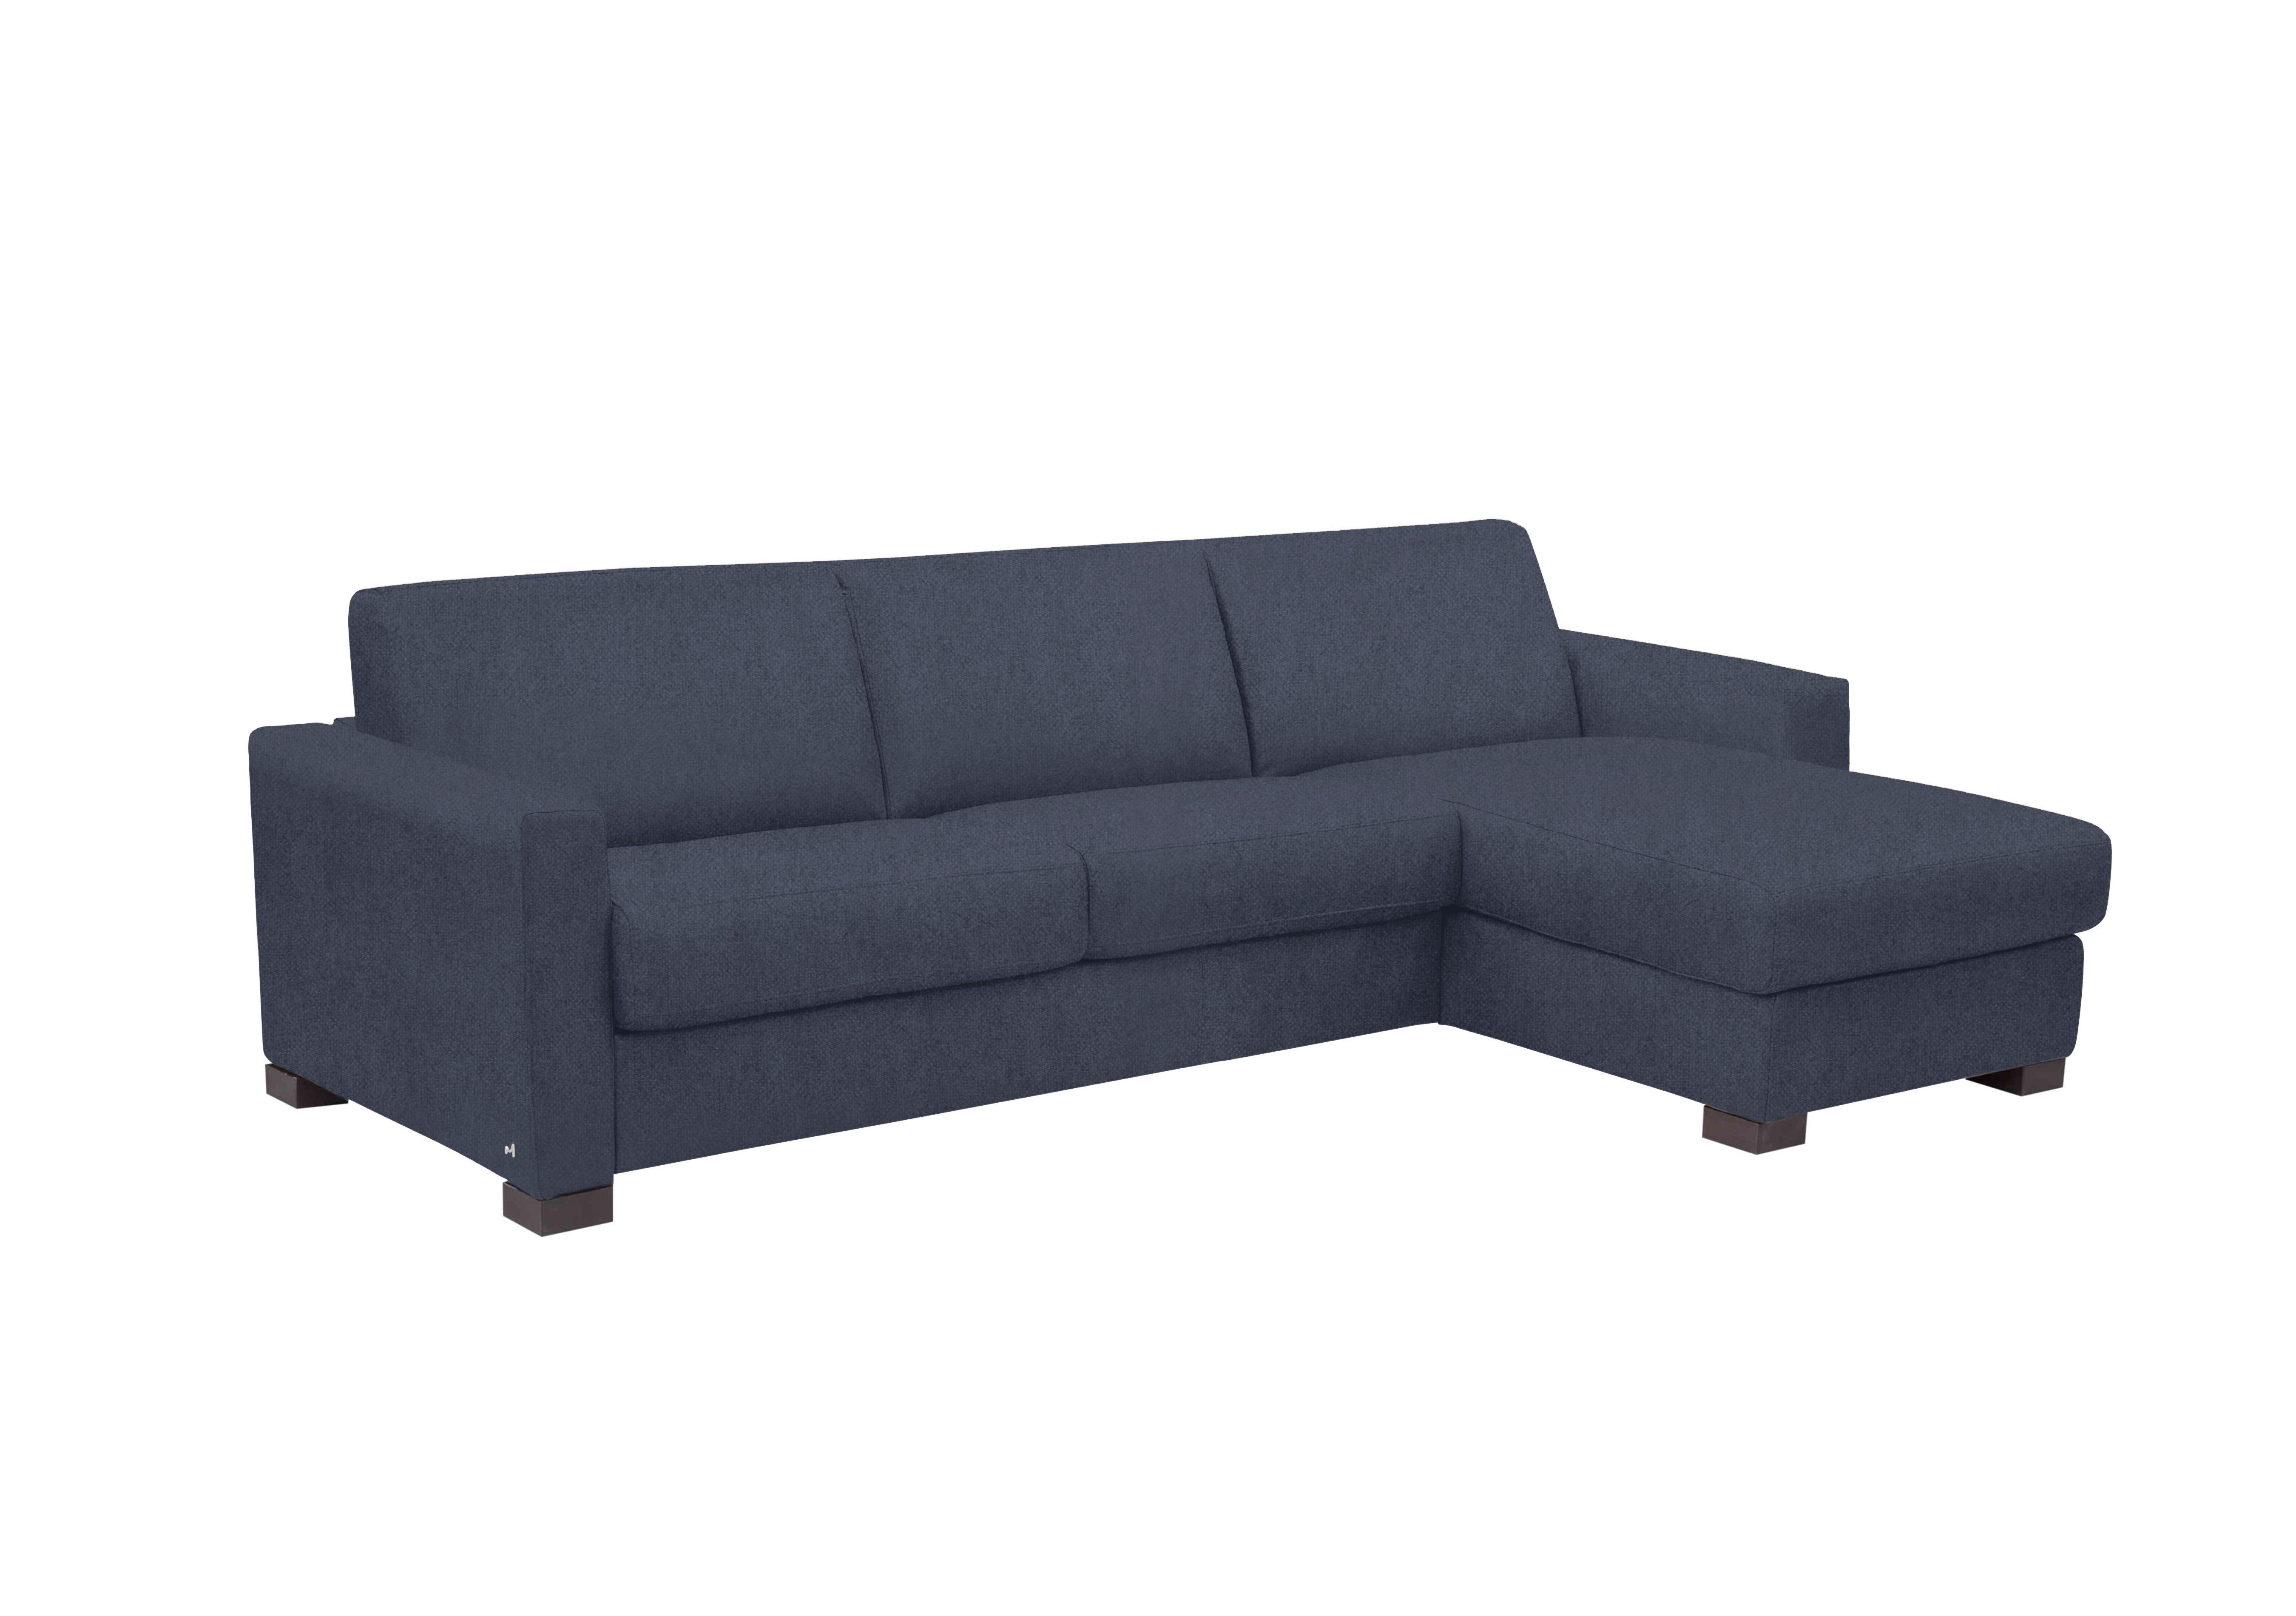 Alcova 3 Seater Fabric Sofa Bed with Storage Chaise with Box Arms in Fuente Ocean on Furniture Village